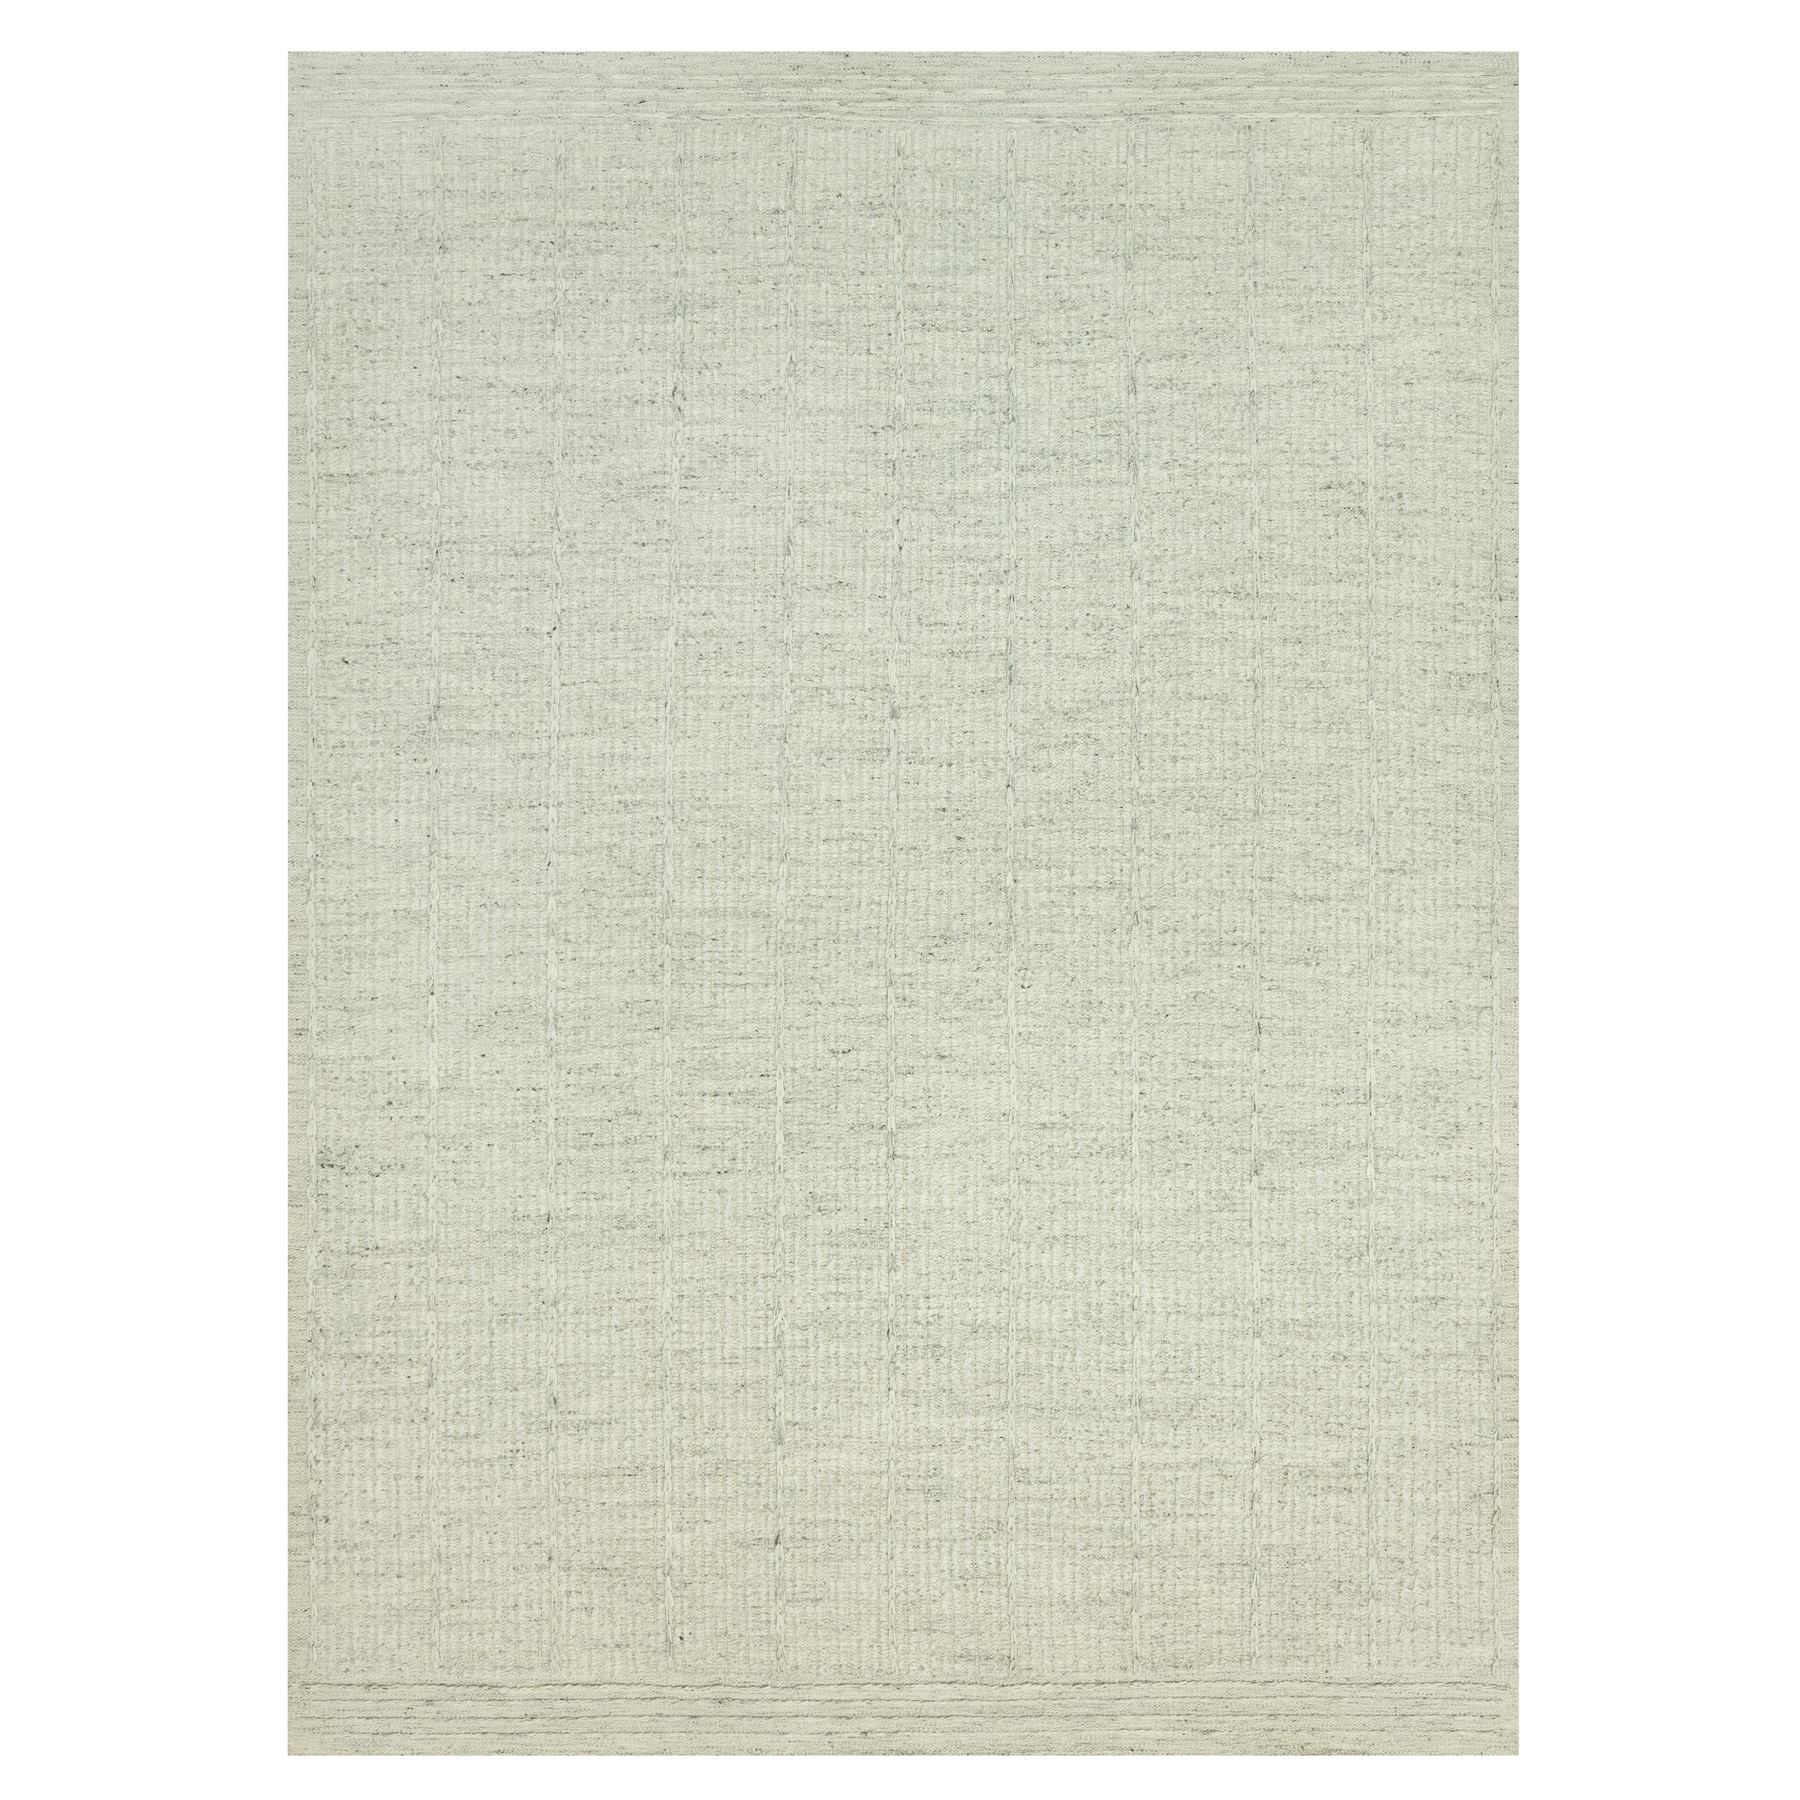 traditional Wool Hand-Woven Area Rug 10'2